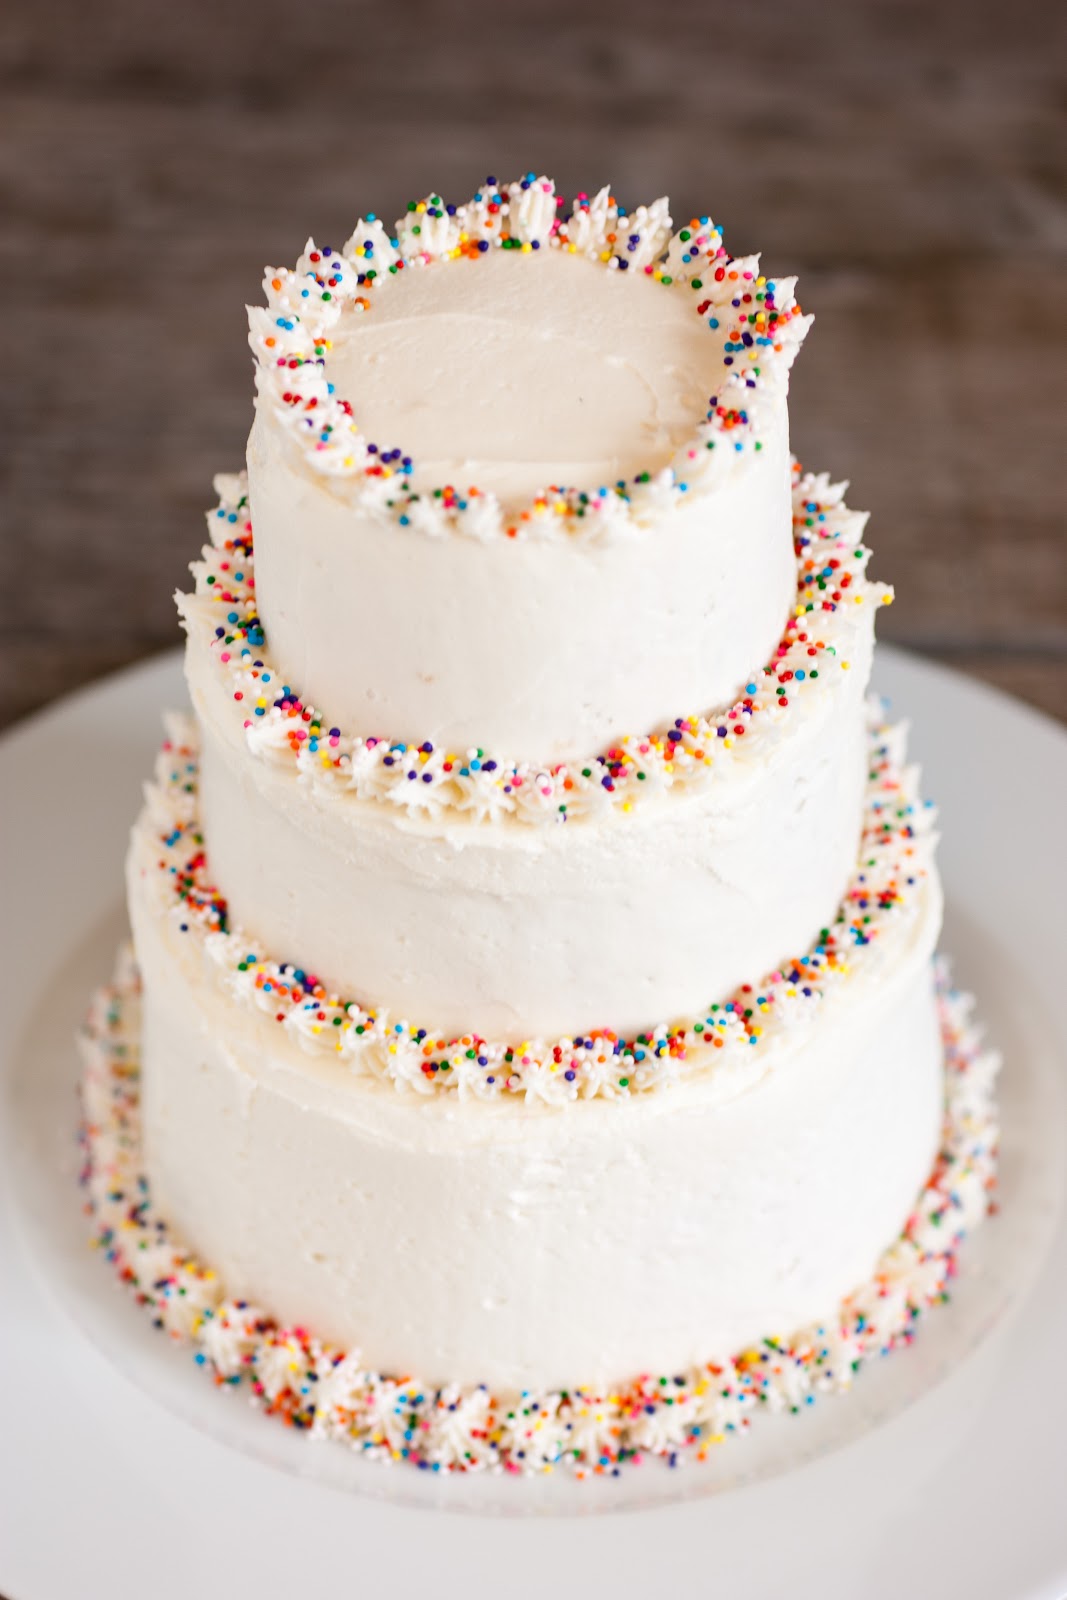 How to Pick your Wedding Cake Design - With Buttercream - Amanda ...